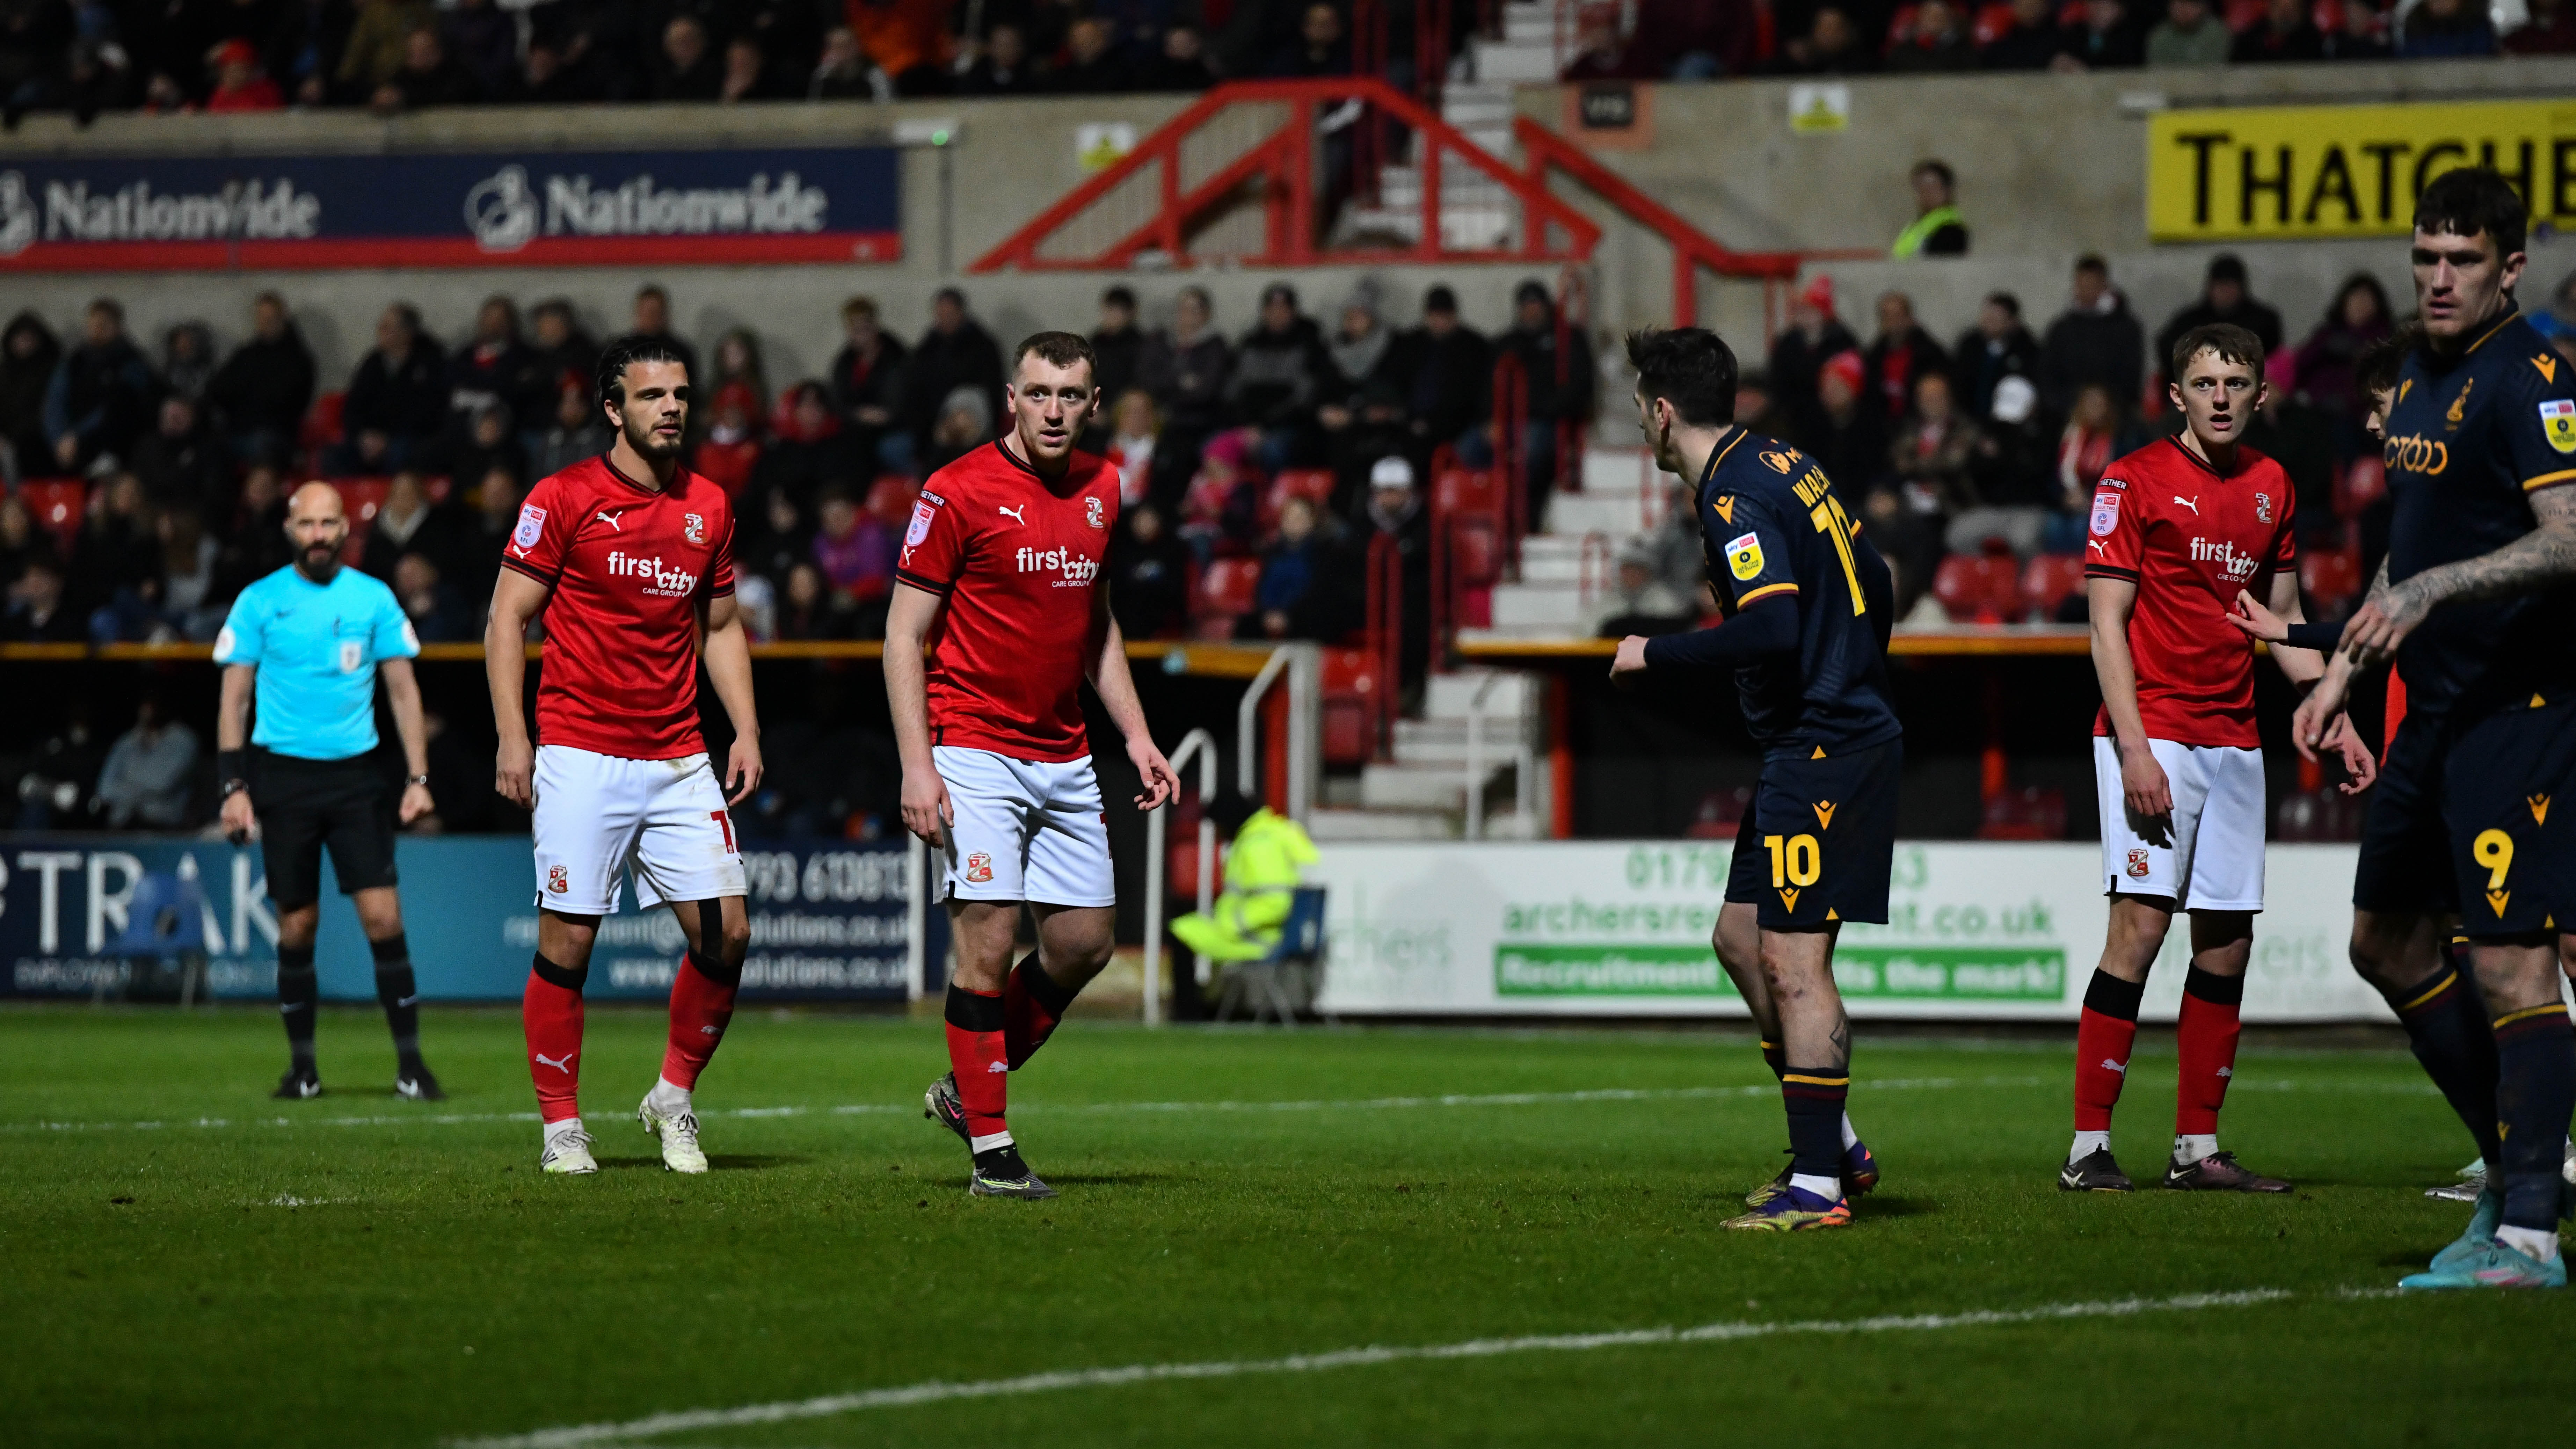 Luke Jephcott said it was a big relief for Swindon to finally end their long winless run